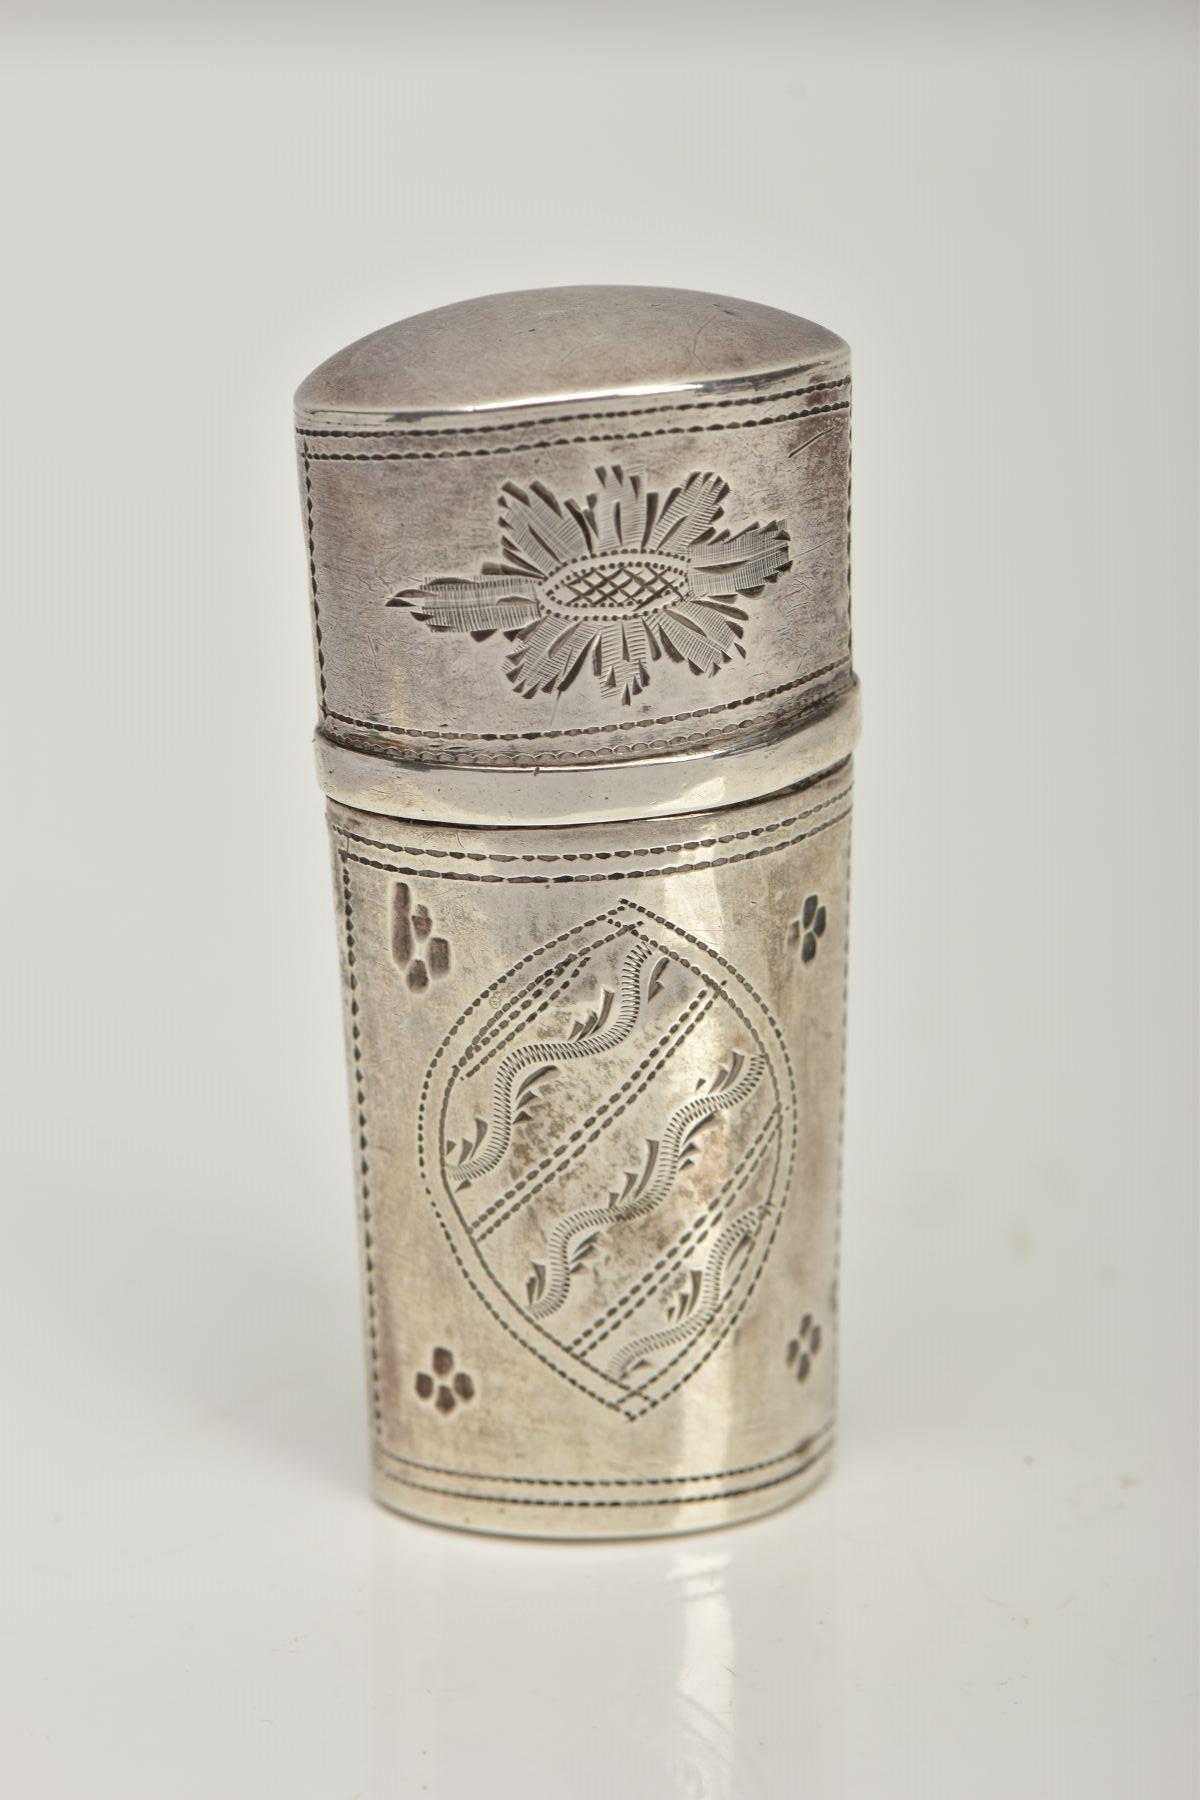 A WHITE METAL NEEDLE/PIN CASE, slightly tapered case engraved with a floral and foliate design,